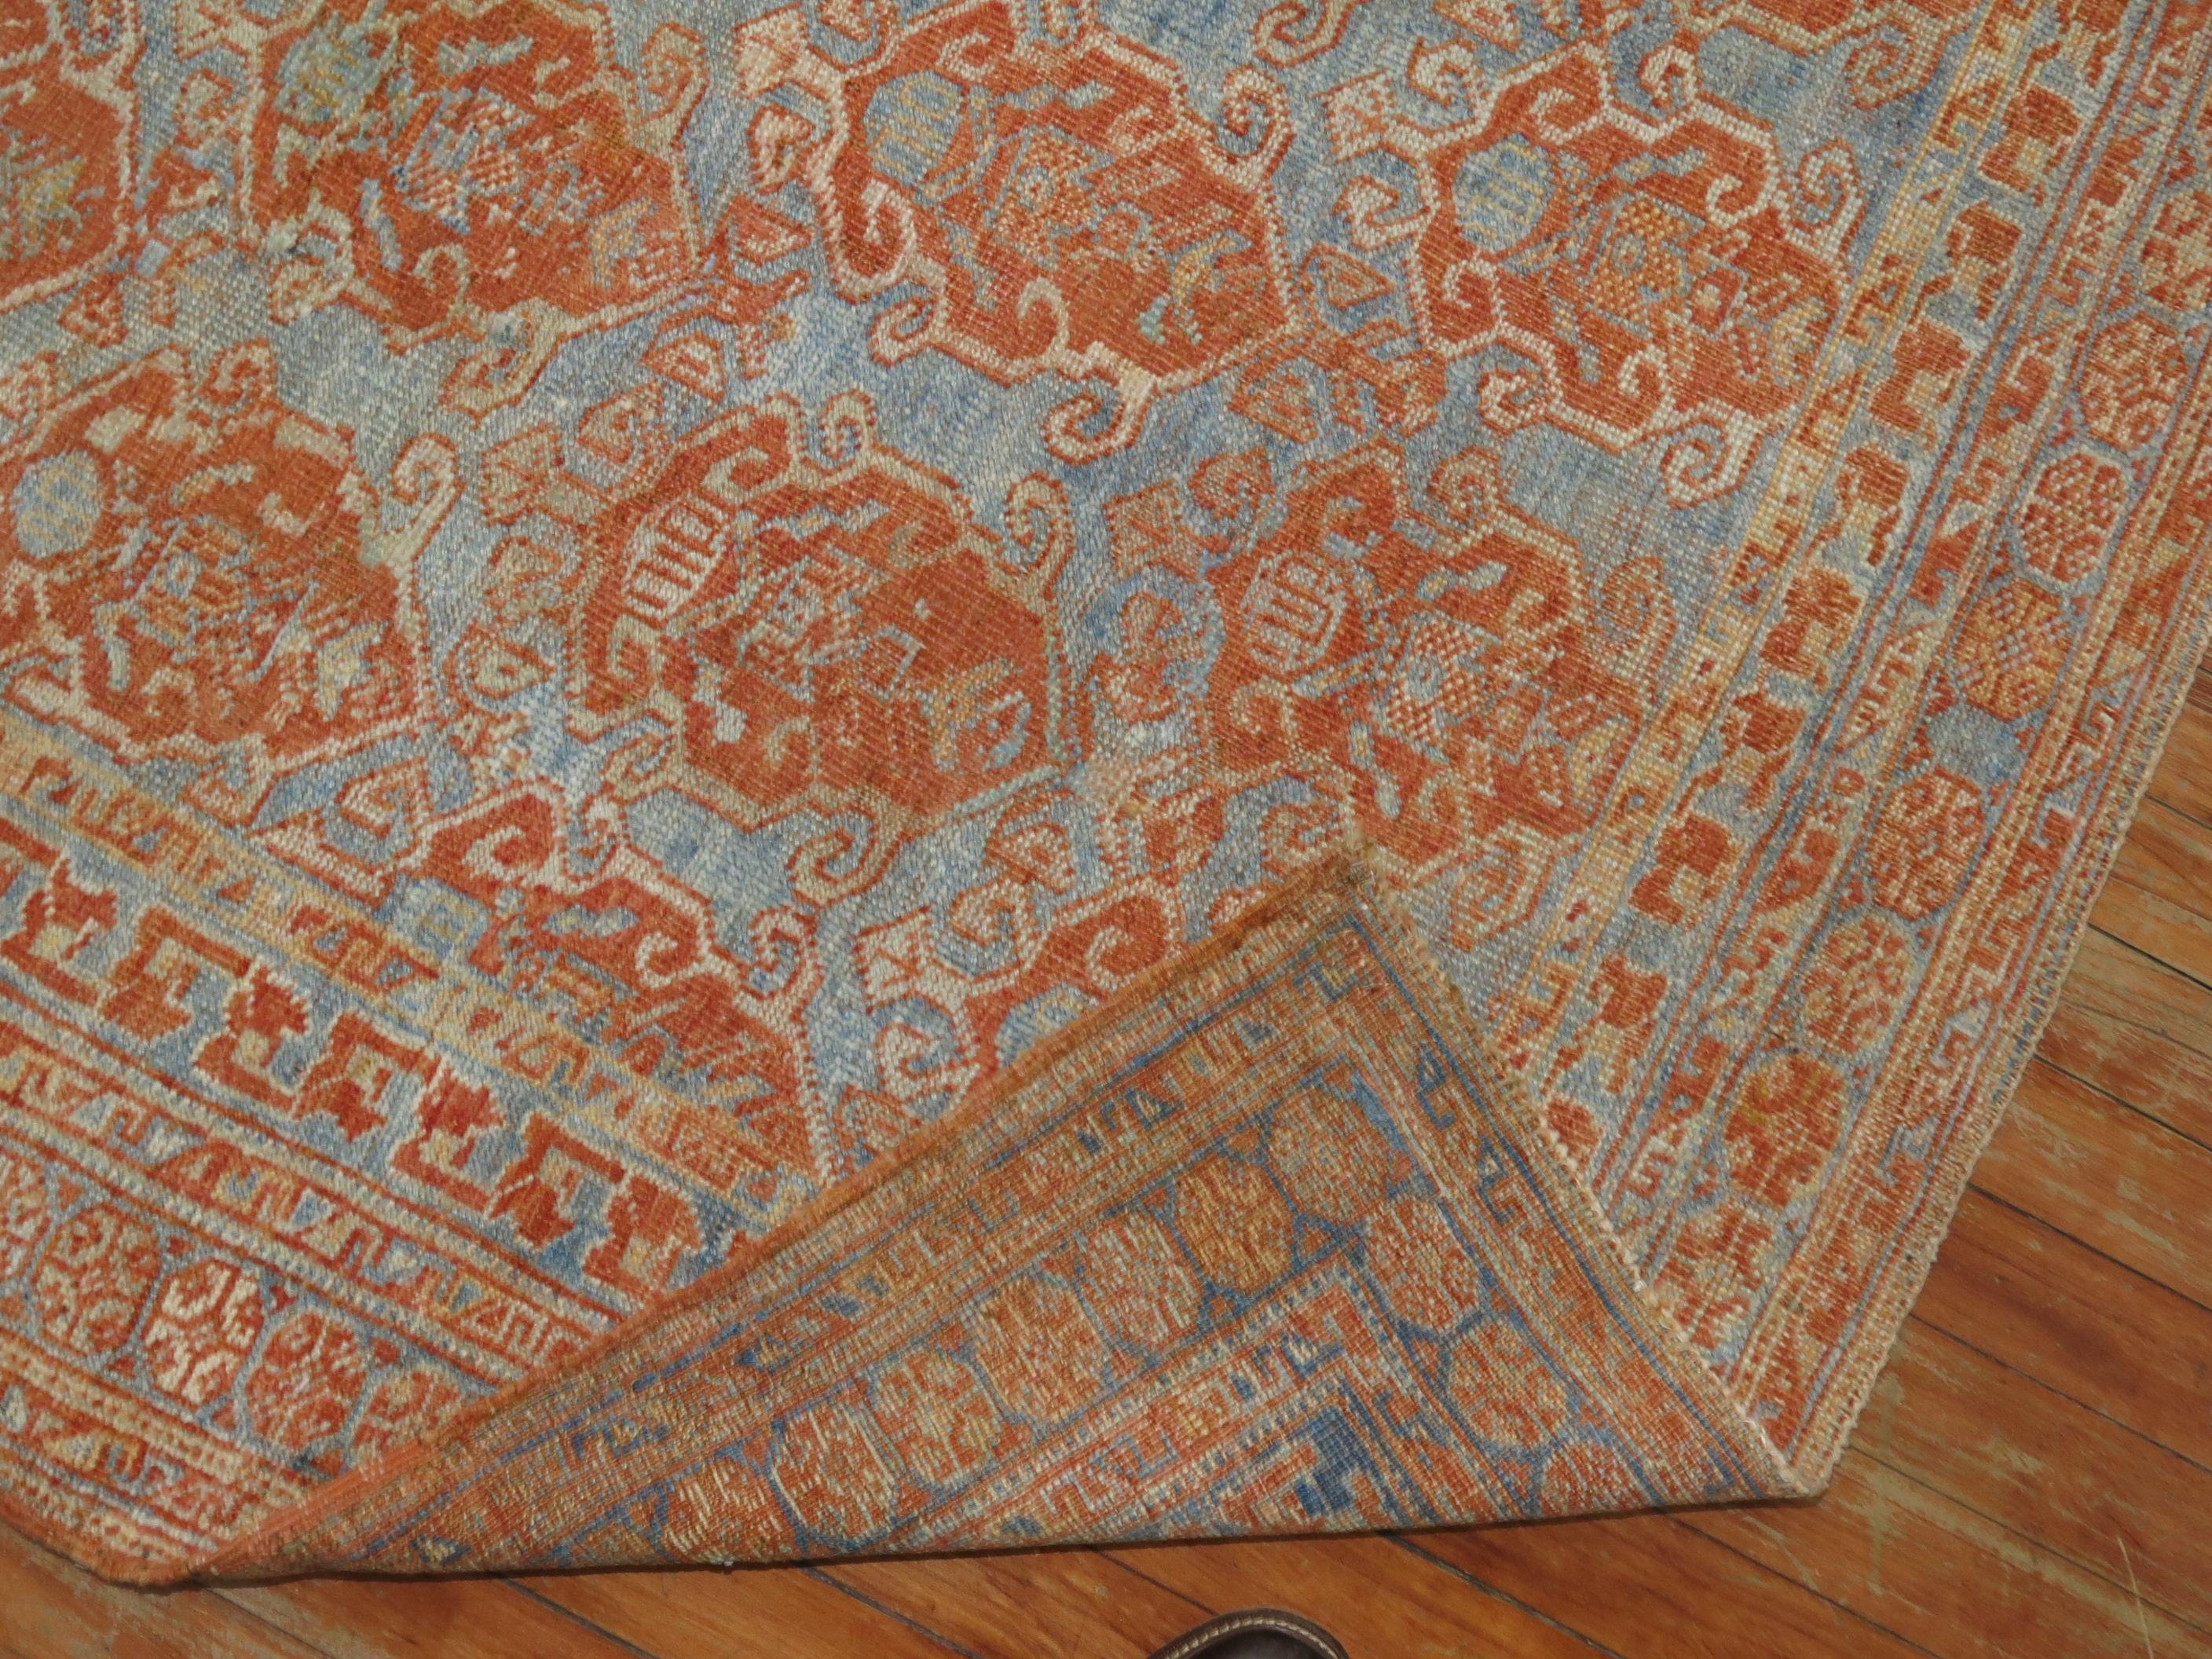 An early 20th century Persian Afshar Tribal rug in sky blue and terracotta tones, circa 1930.

Measure: 4'4'' x 4'10''.